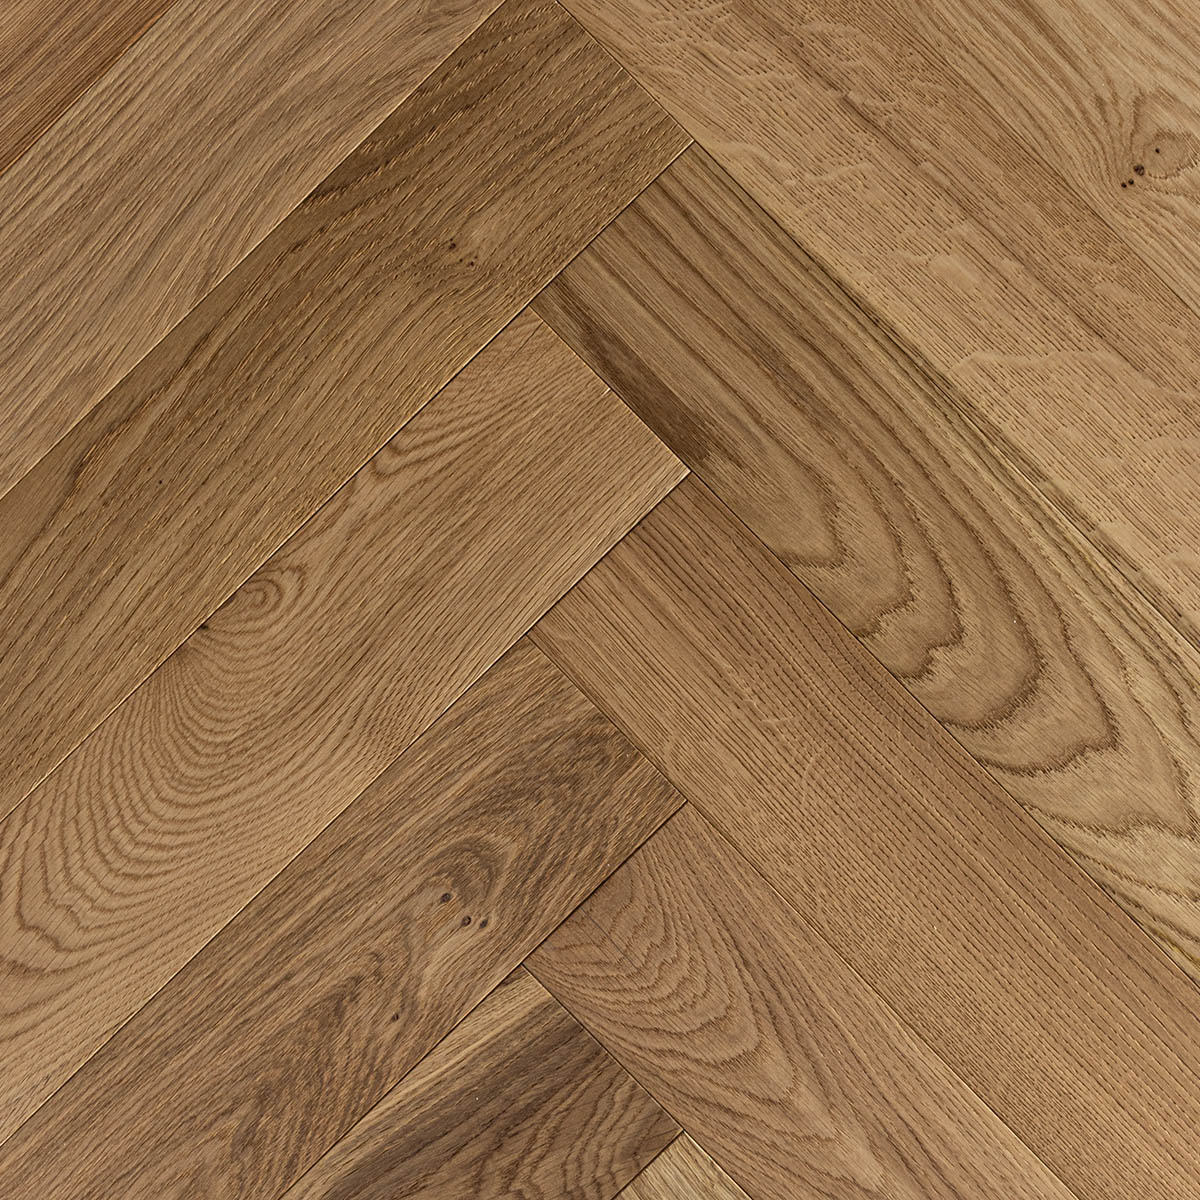 Natural-grade European oak floor finished with an unfinished look